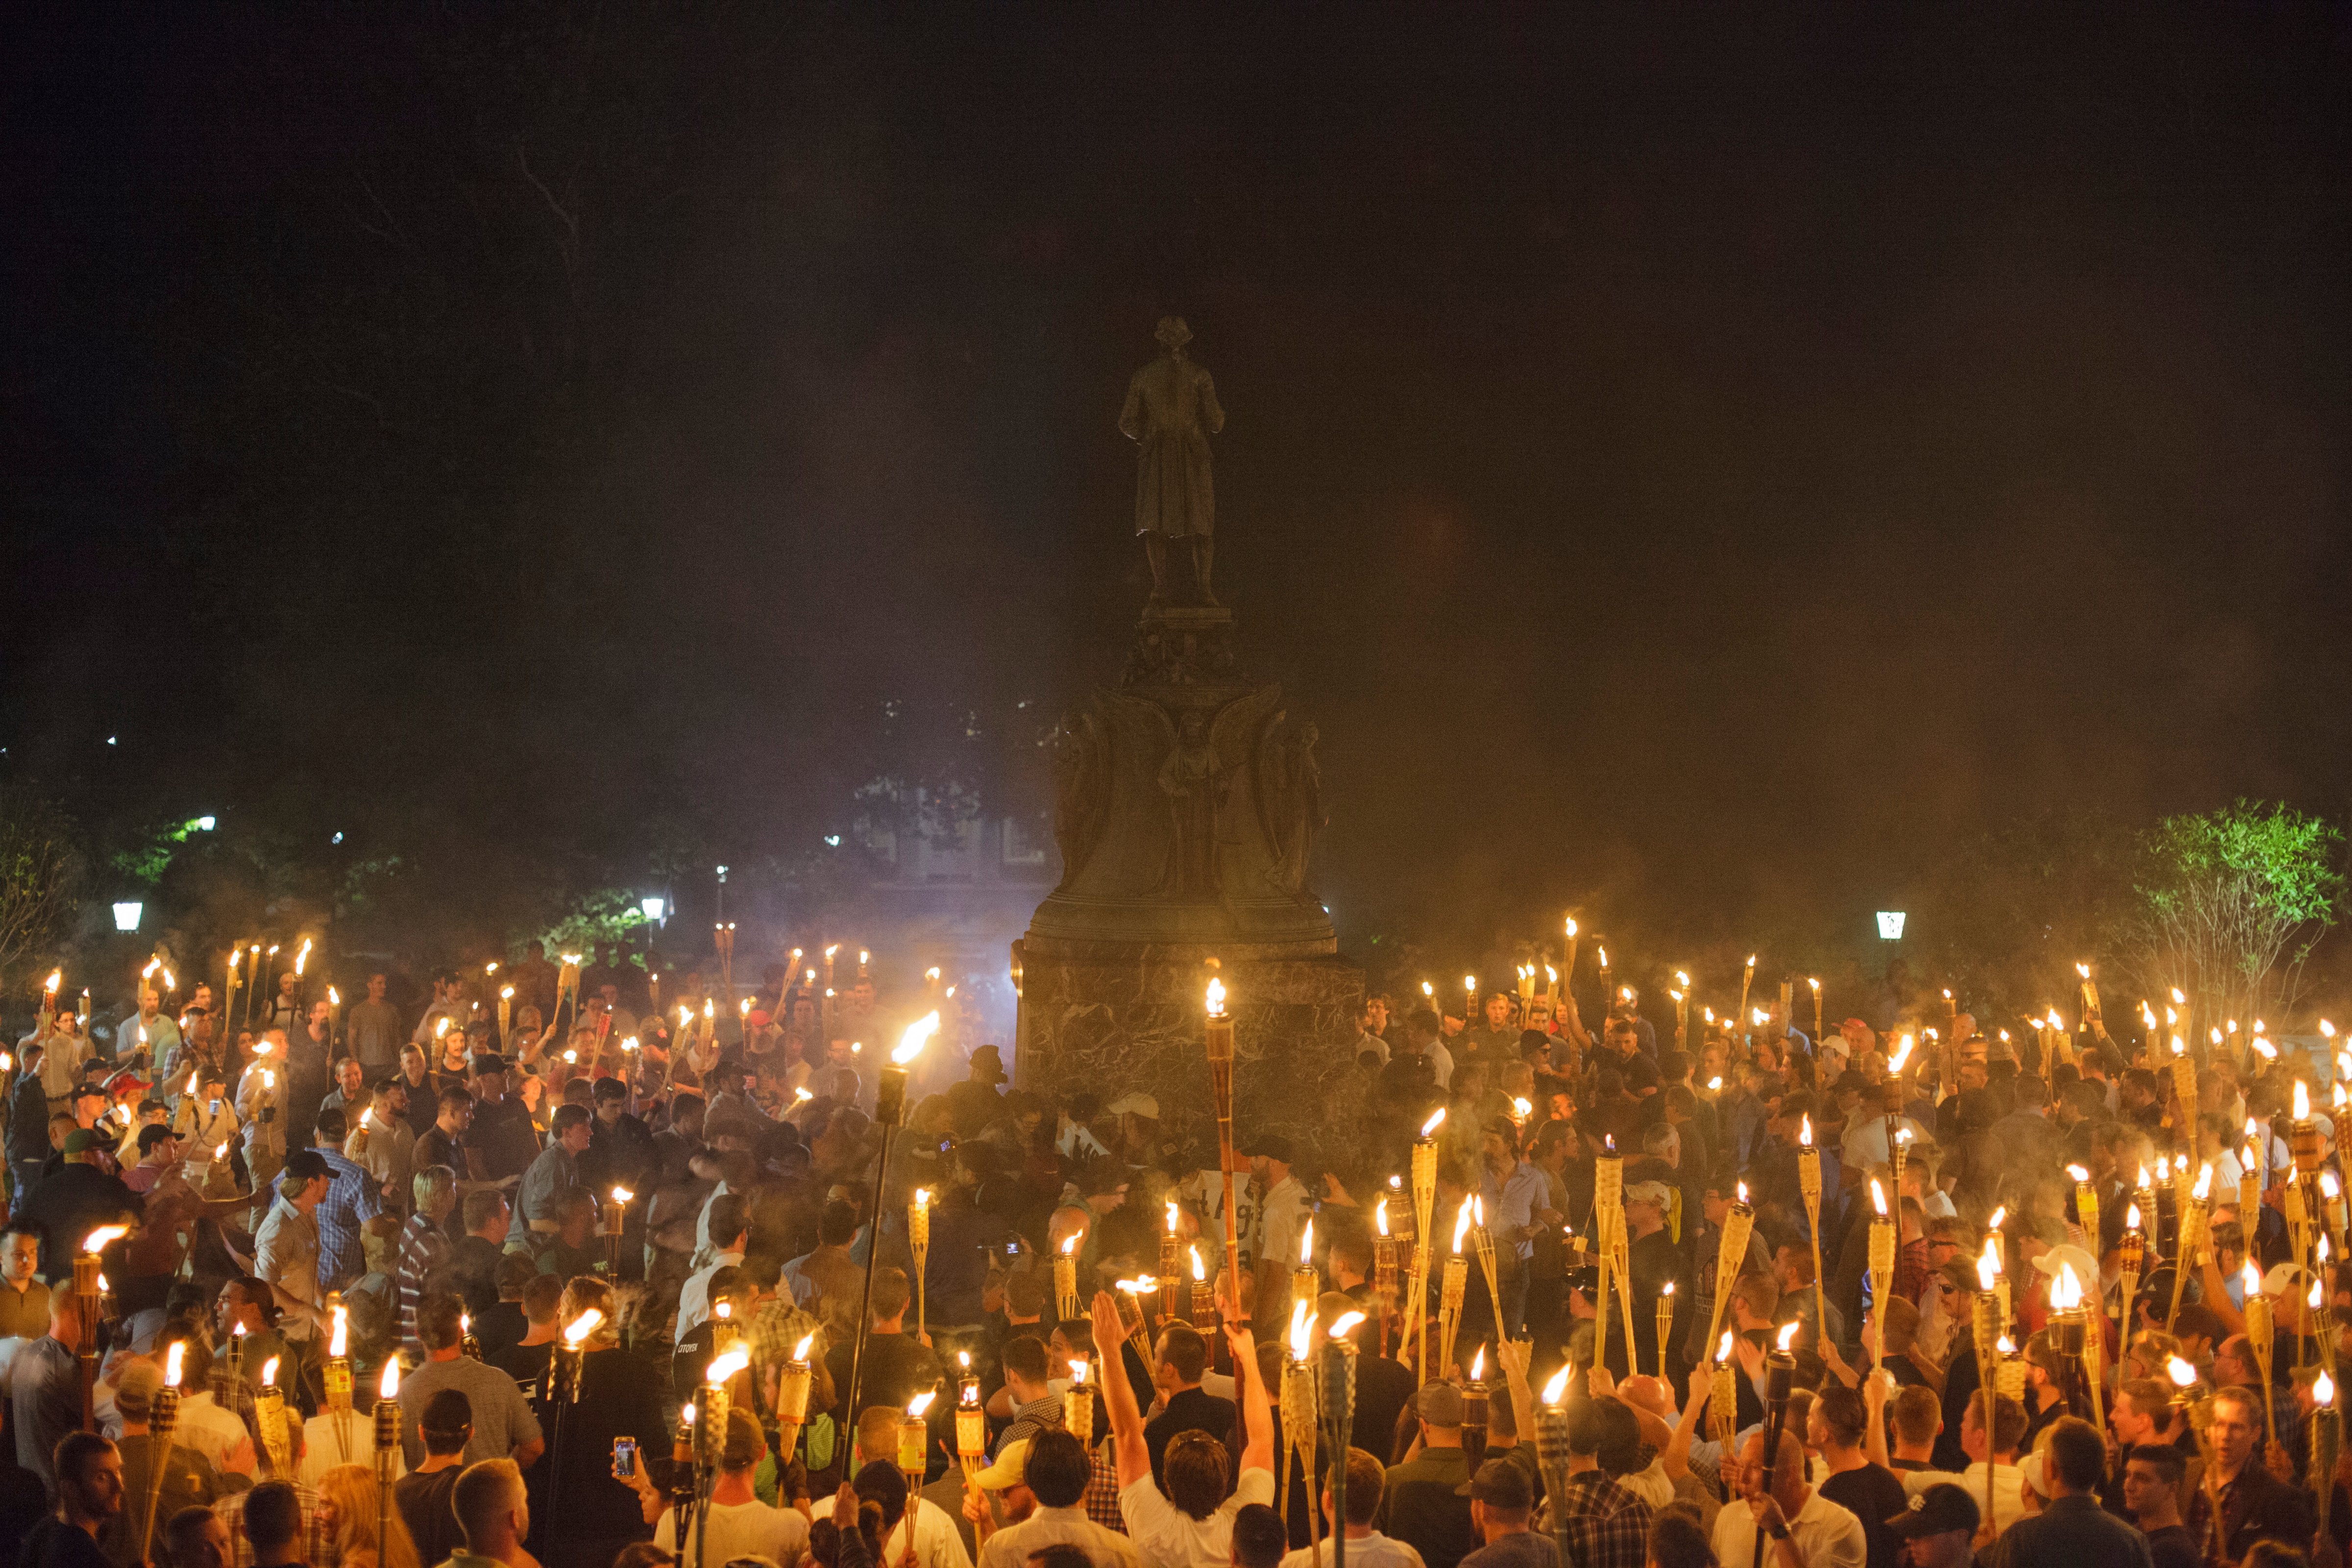 Neo Nazis, Alt-Right, and White Supremacists encircle counter protestors at the base of a statue of Thomas Jefferson after marching through the University of Virginia campus with torches in Charlottesville, Va., USA on August 11, 2017. (Shay Horse&mdash;NurPhoto / Getty Images)